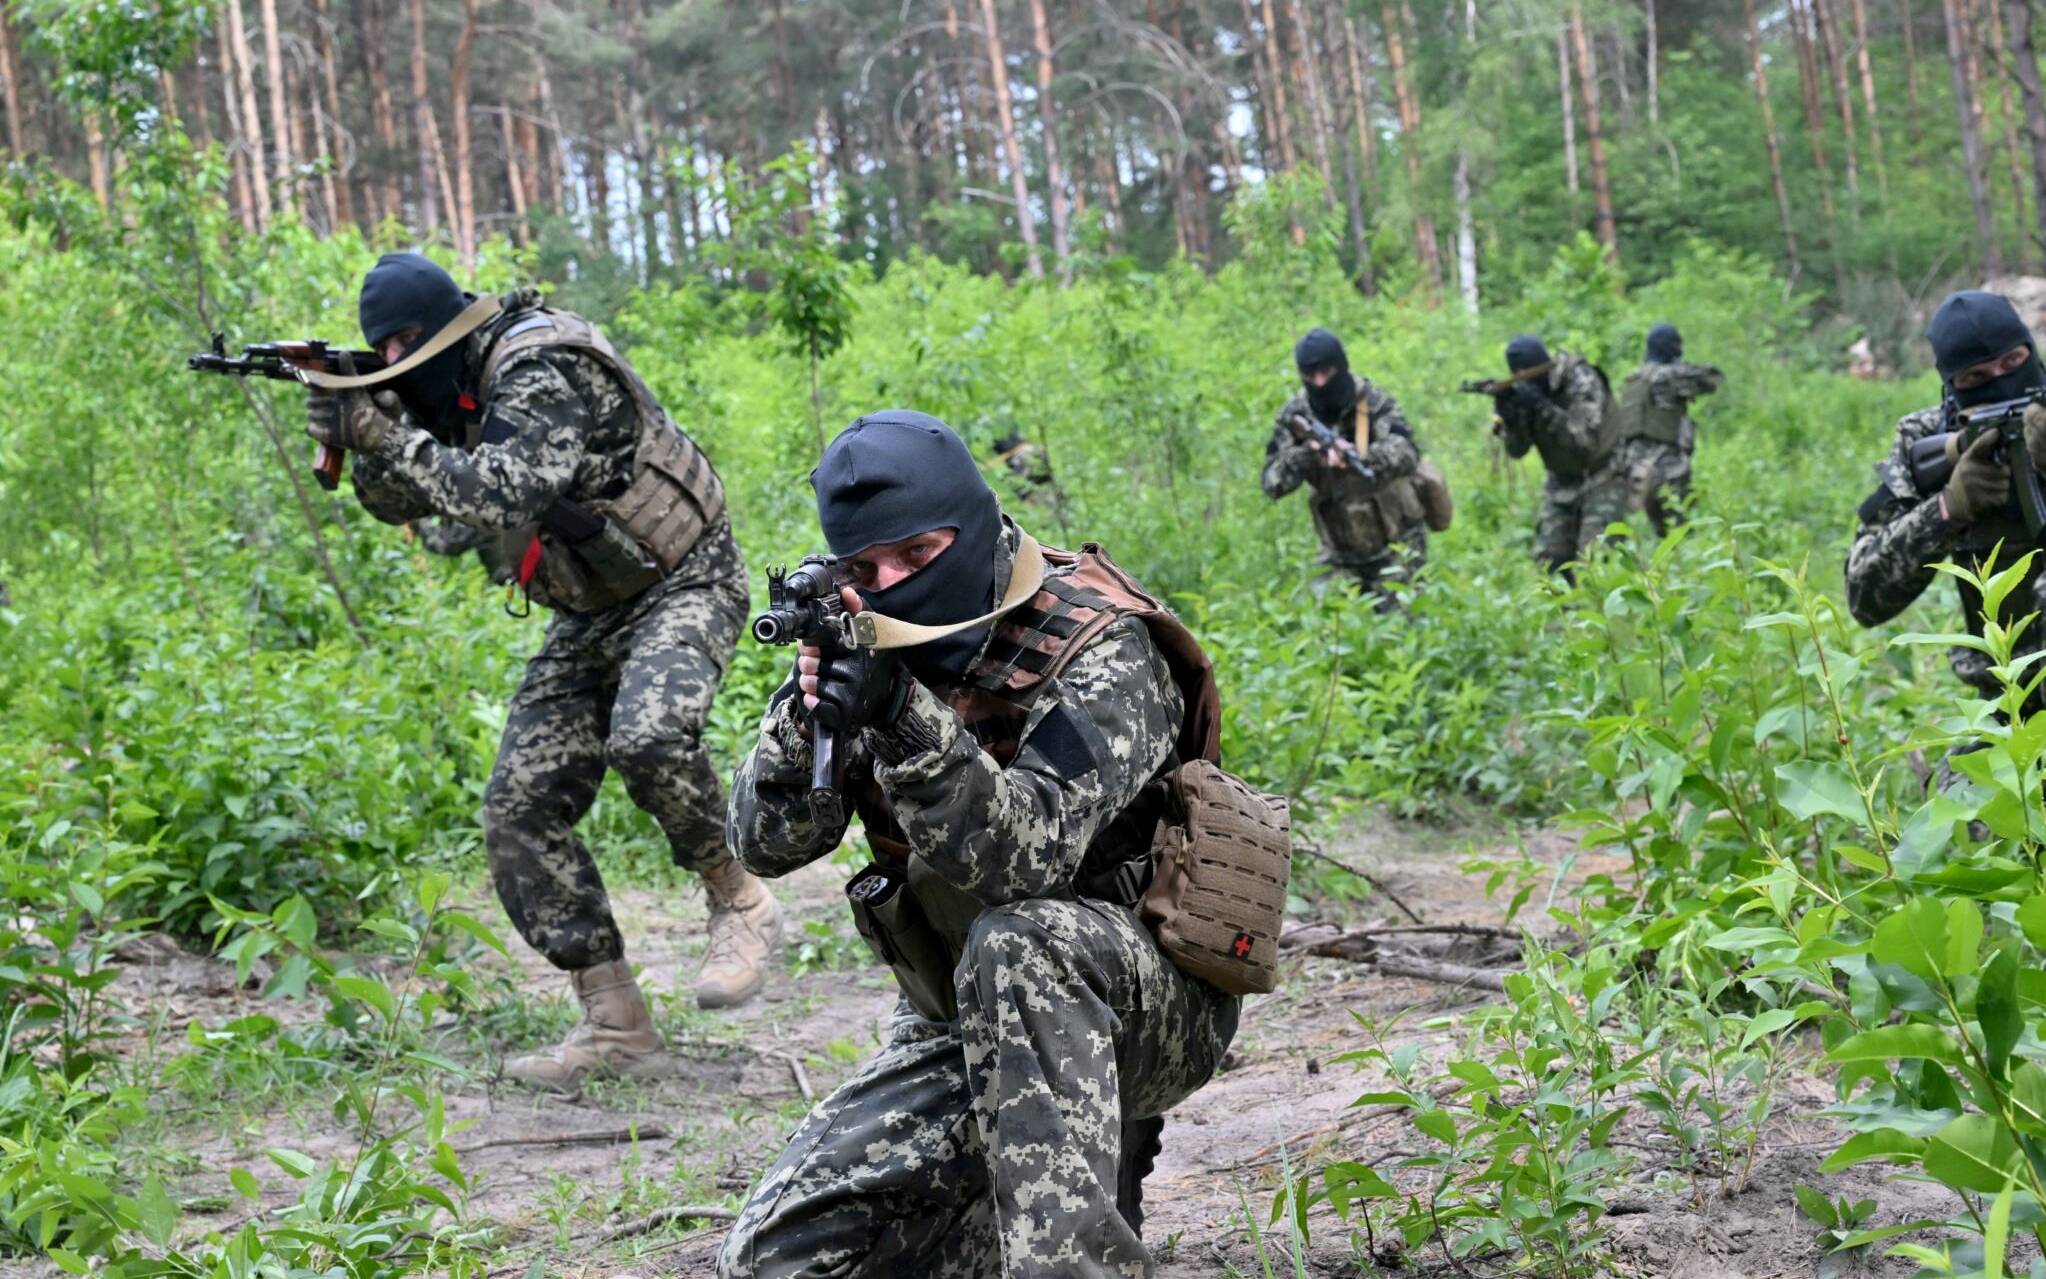 Fighters of the territorial defence unit, a support force to the regular Ukrainian army, take part in an exercise for the regular combat tactics classes, not far from the Ukrainian town of Bucha, Kyiv region on June 17, 2022. (Photo by Sergei SUPINSKY / AFP)